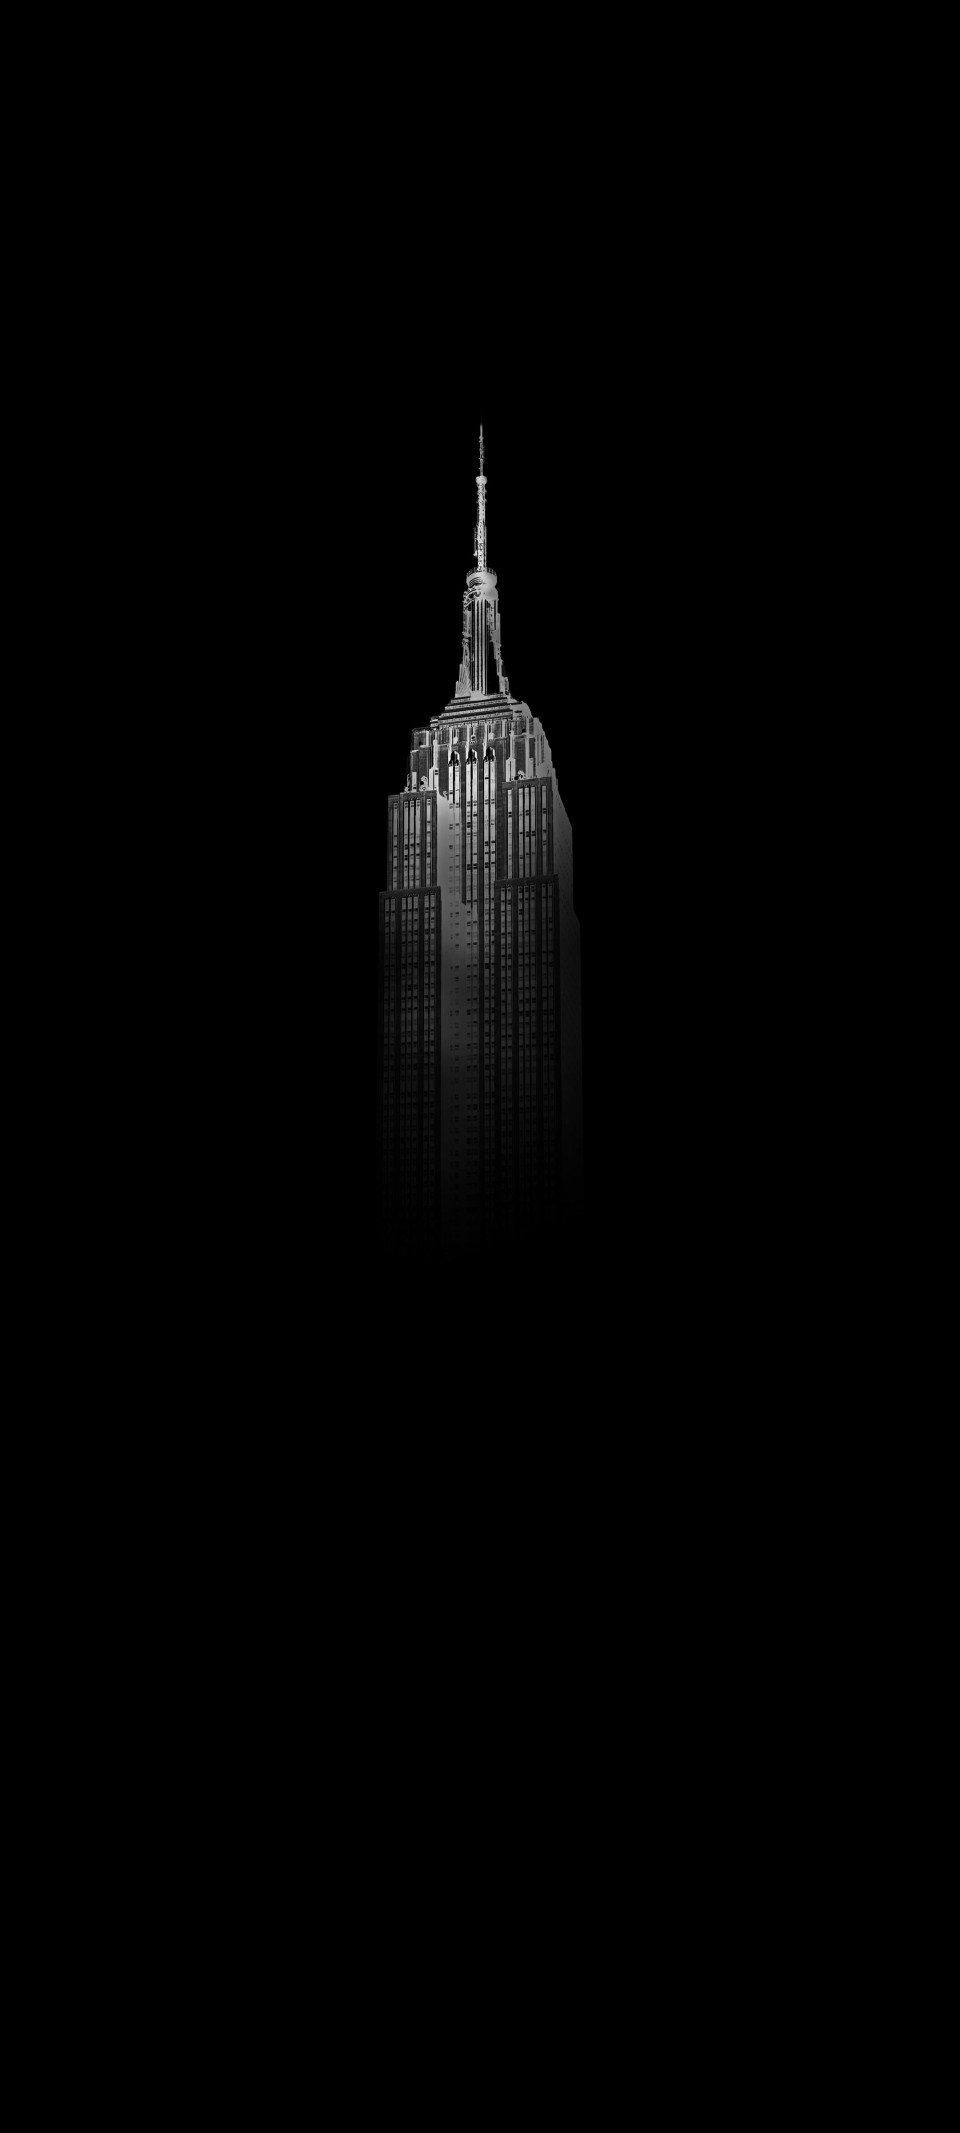 Free photo of 4K Amoled Wallpaper with Black White & Darkness